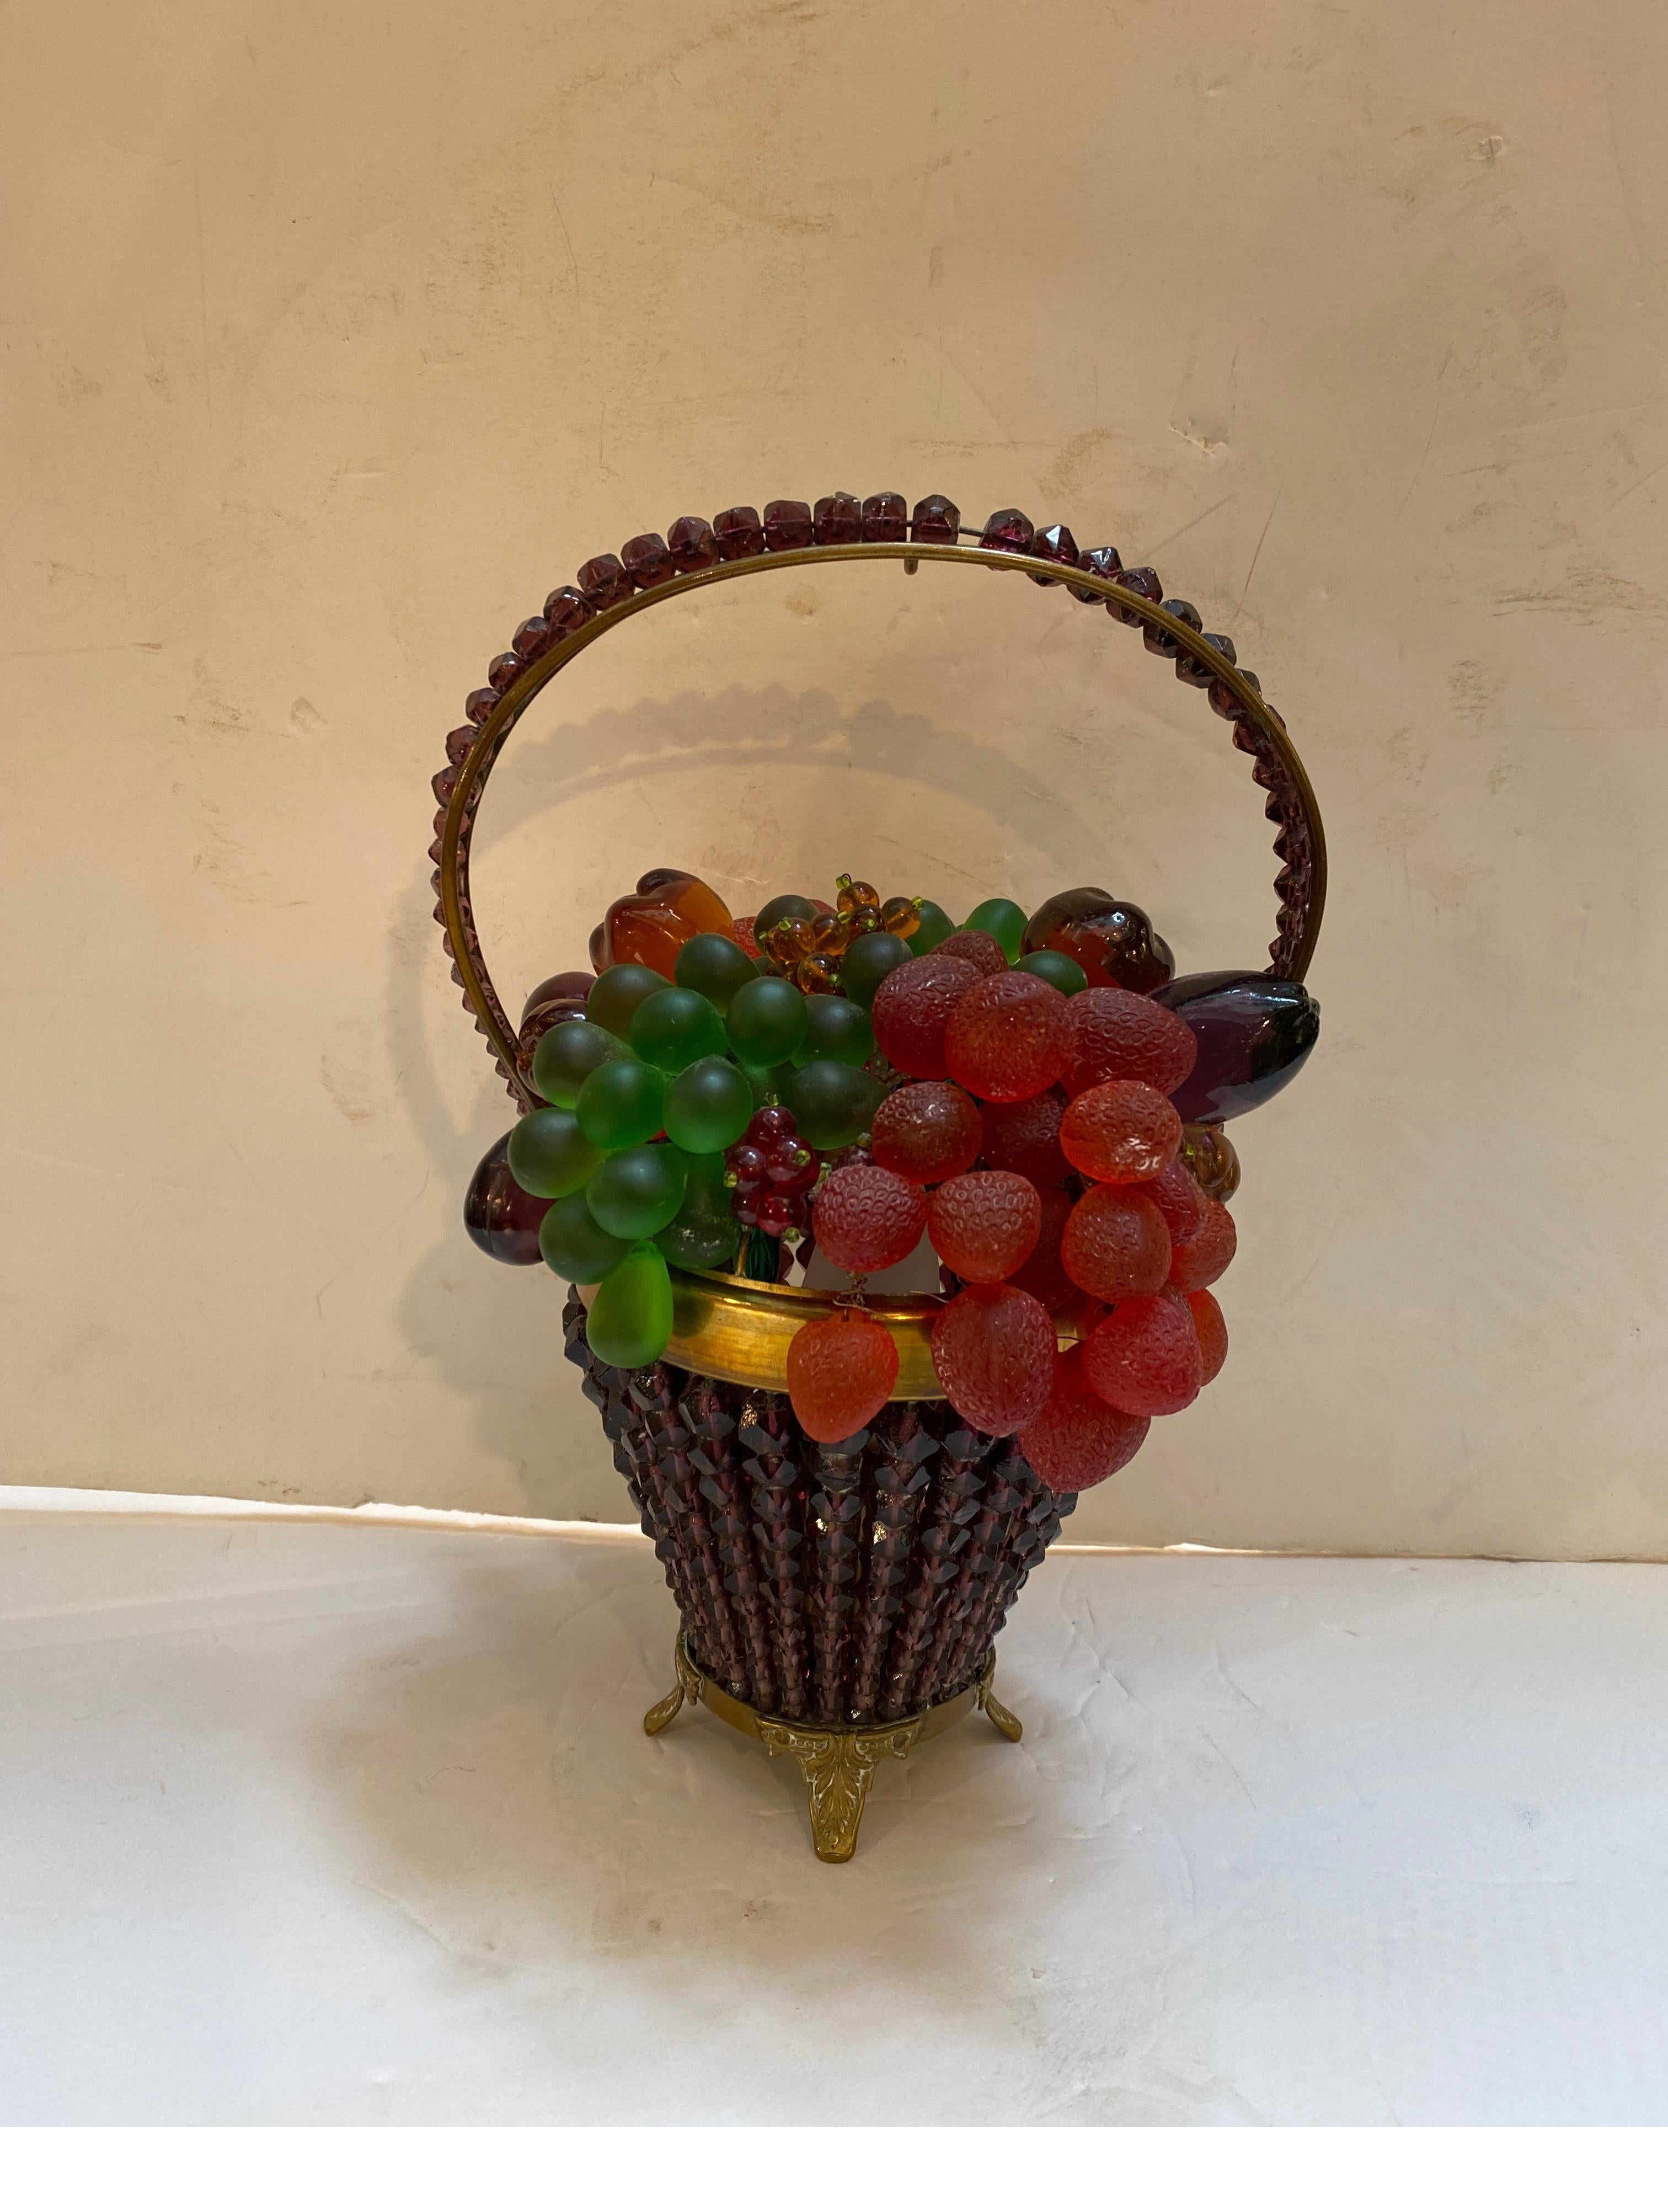 Whimsical 1920's Czech glass beaded fruit basket form lamp. The beaded handle with fruit shaped beads forming the filling of the basket. The metal shape of the handle and basket made of brass with the hand applied glass beads attached and arranged